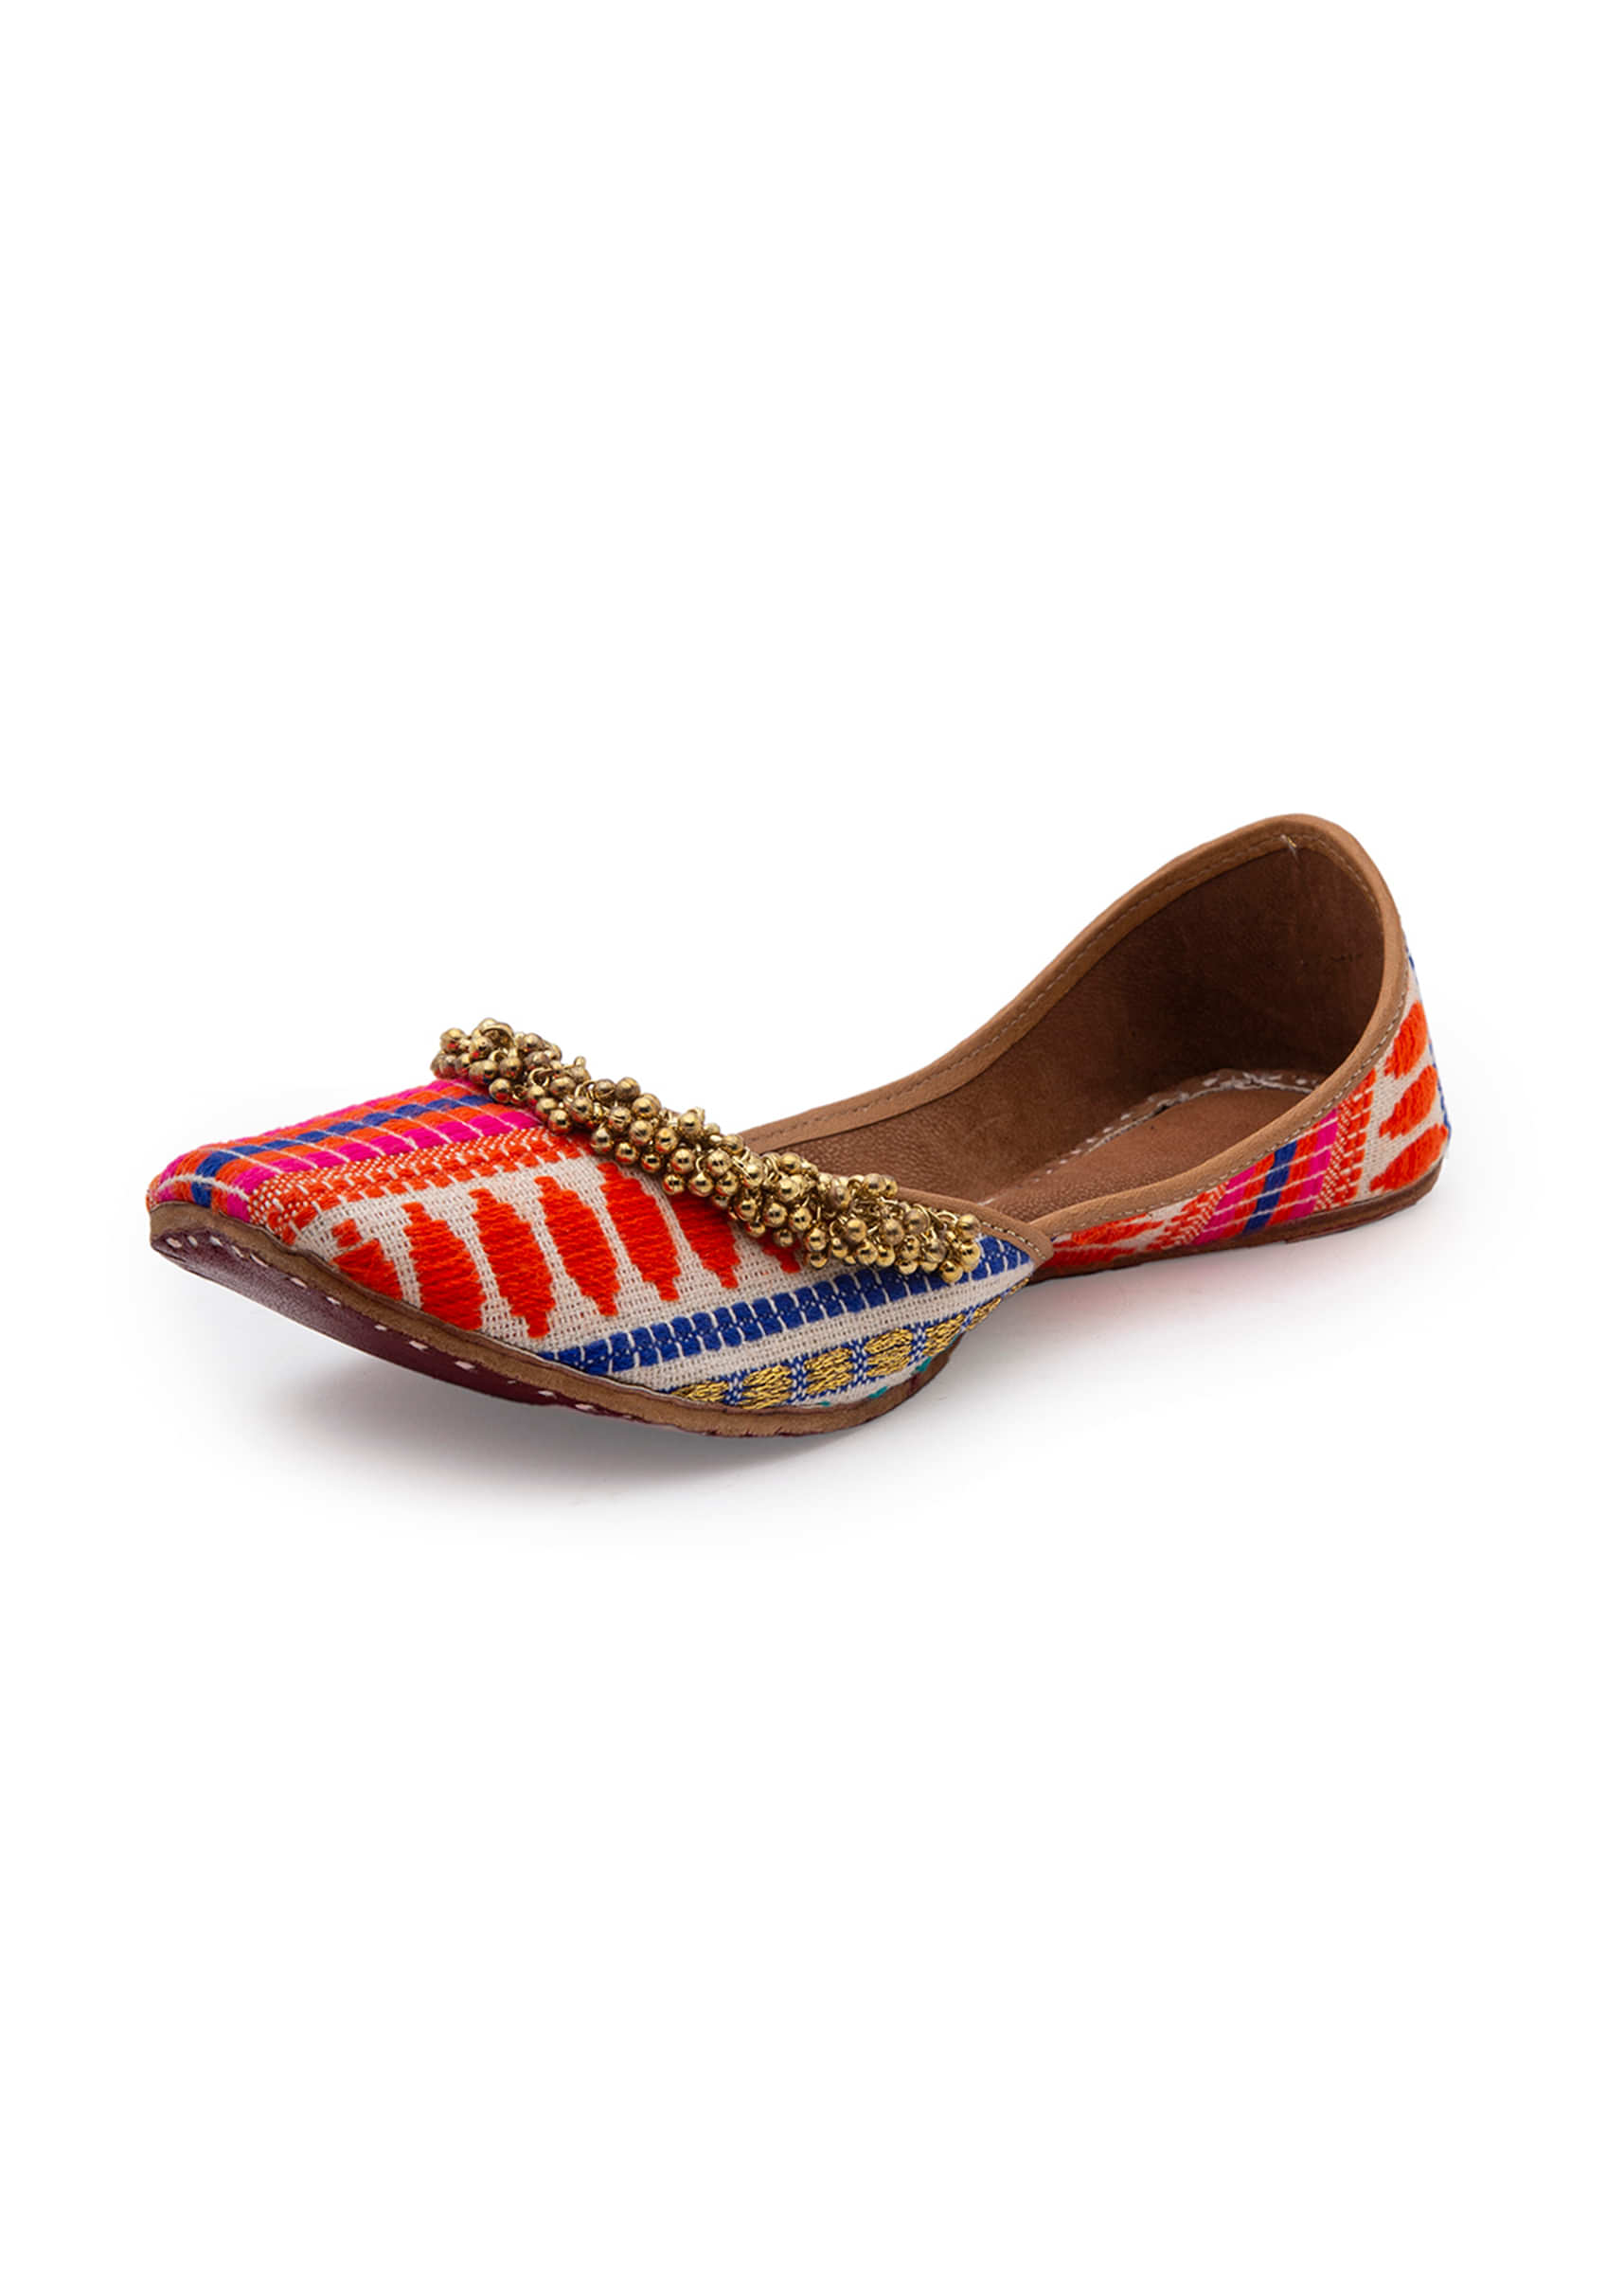 Multi Colored Juttis In Jacquard With Ethnic Print And Tiny Ghungroos By 5 Elements